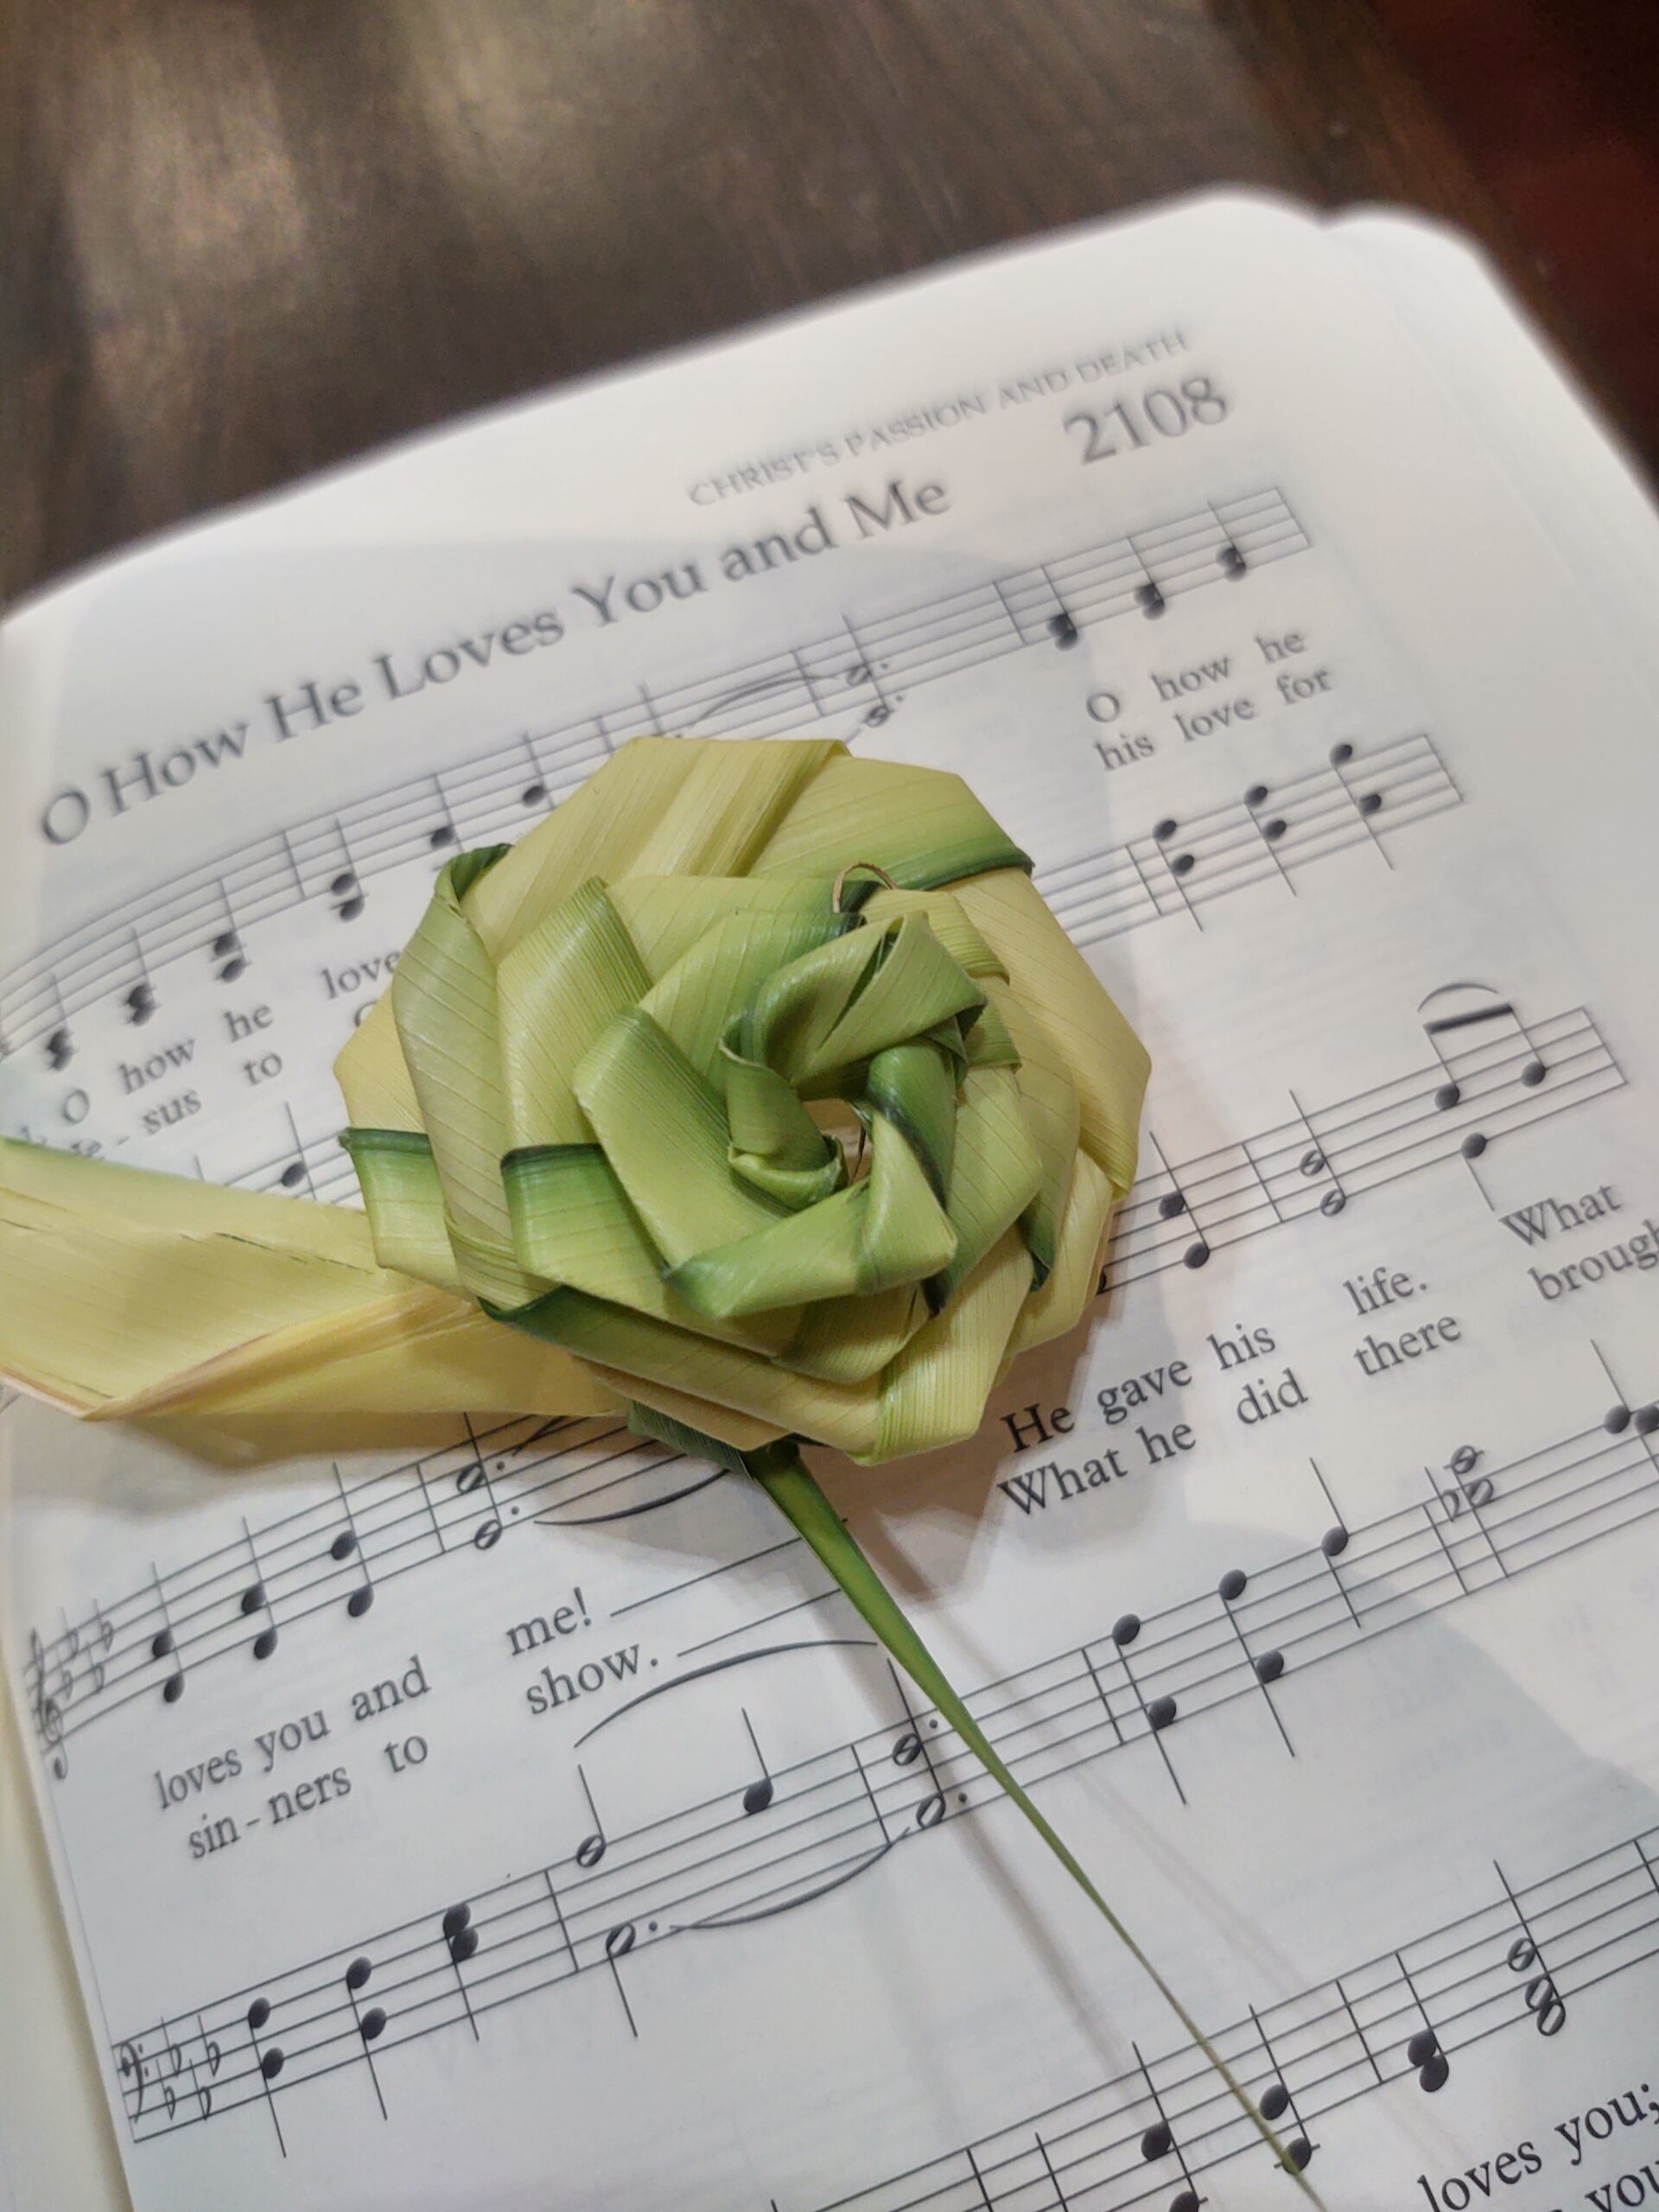 Palm leaf crafted into a Rose